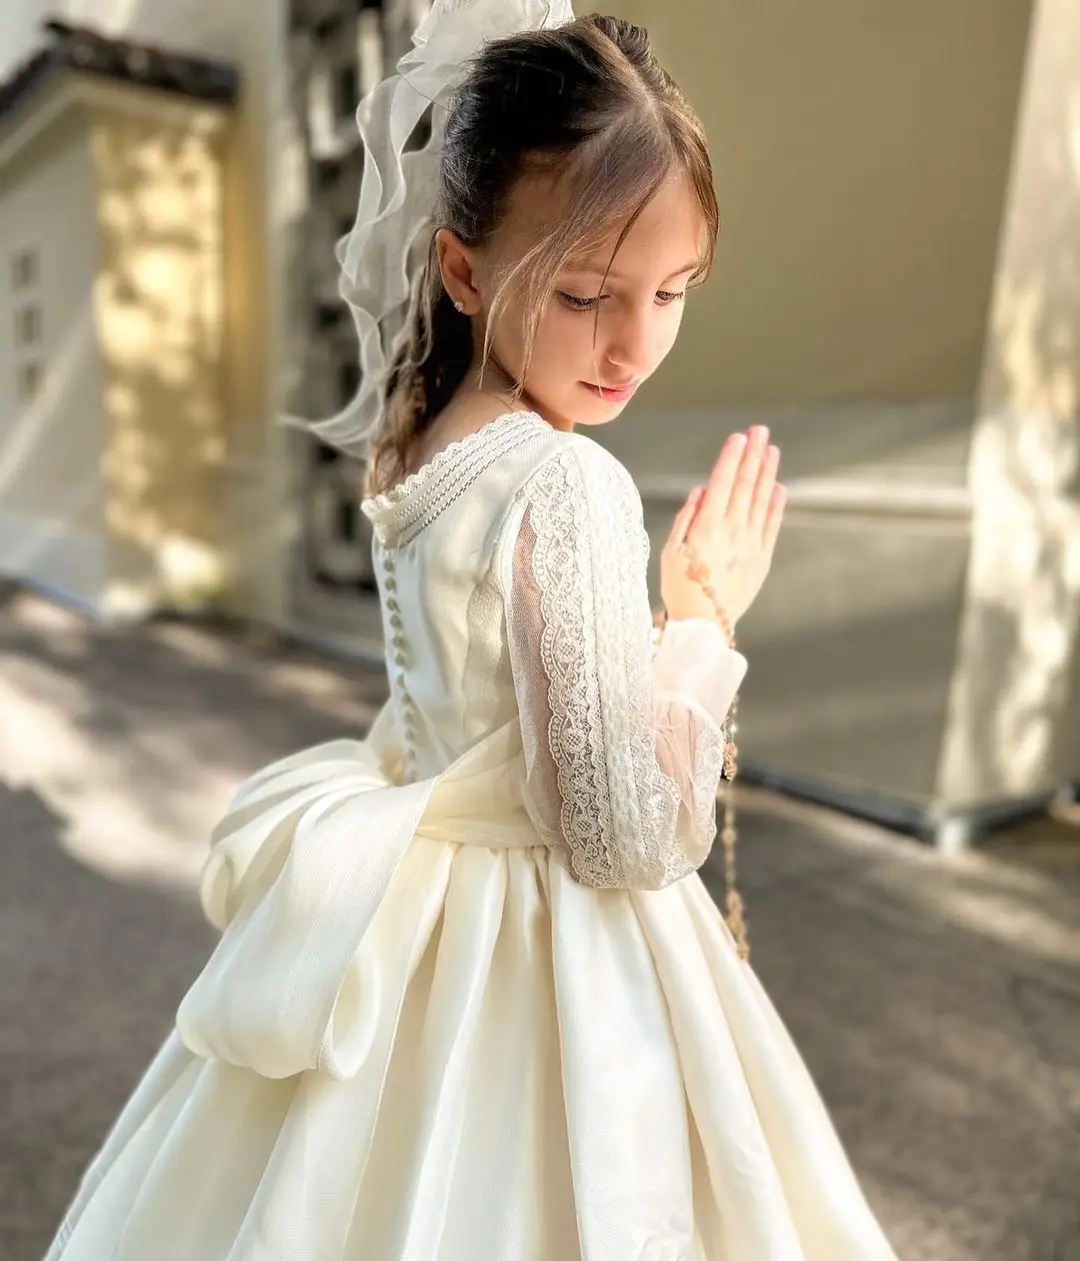 

First Communion Dress Made with Satin Flower Girl Dress Long Sleeves with Vintage-like Laces Bow and Covered Buttons for Closure